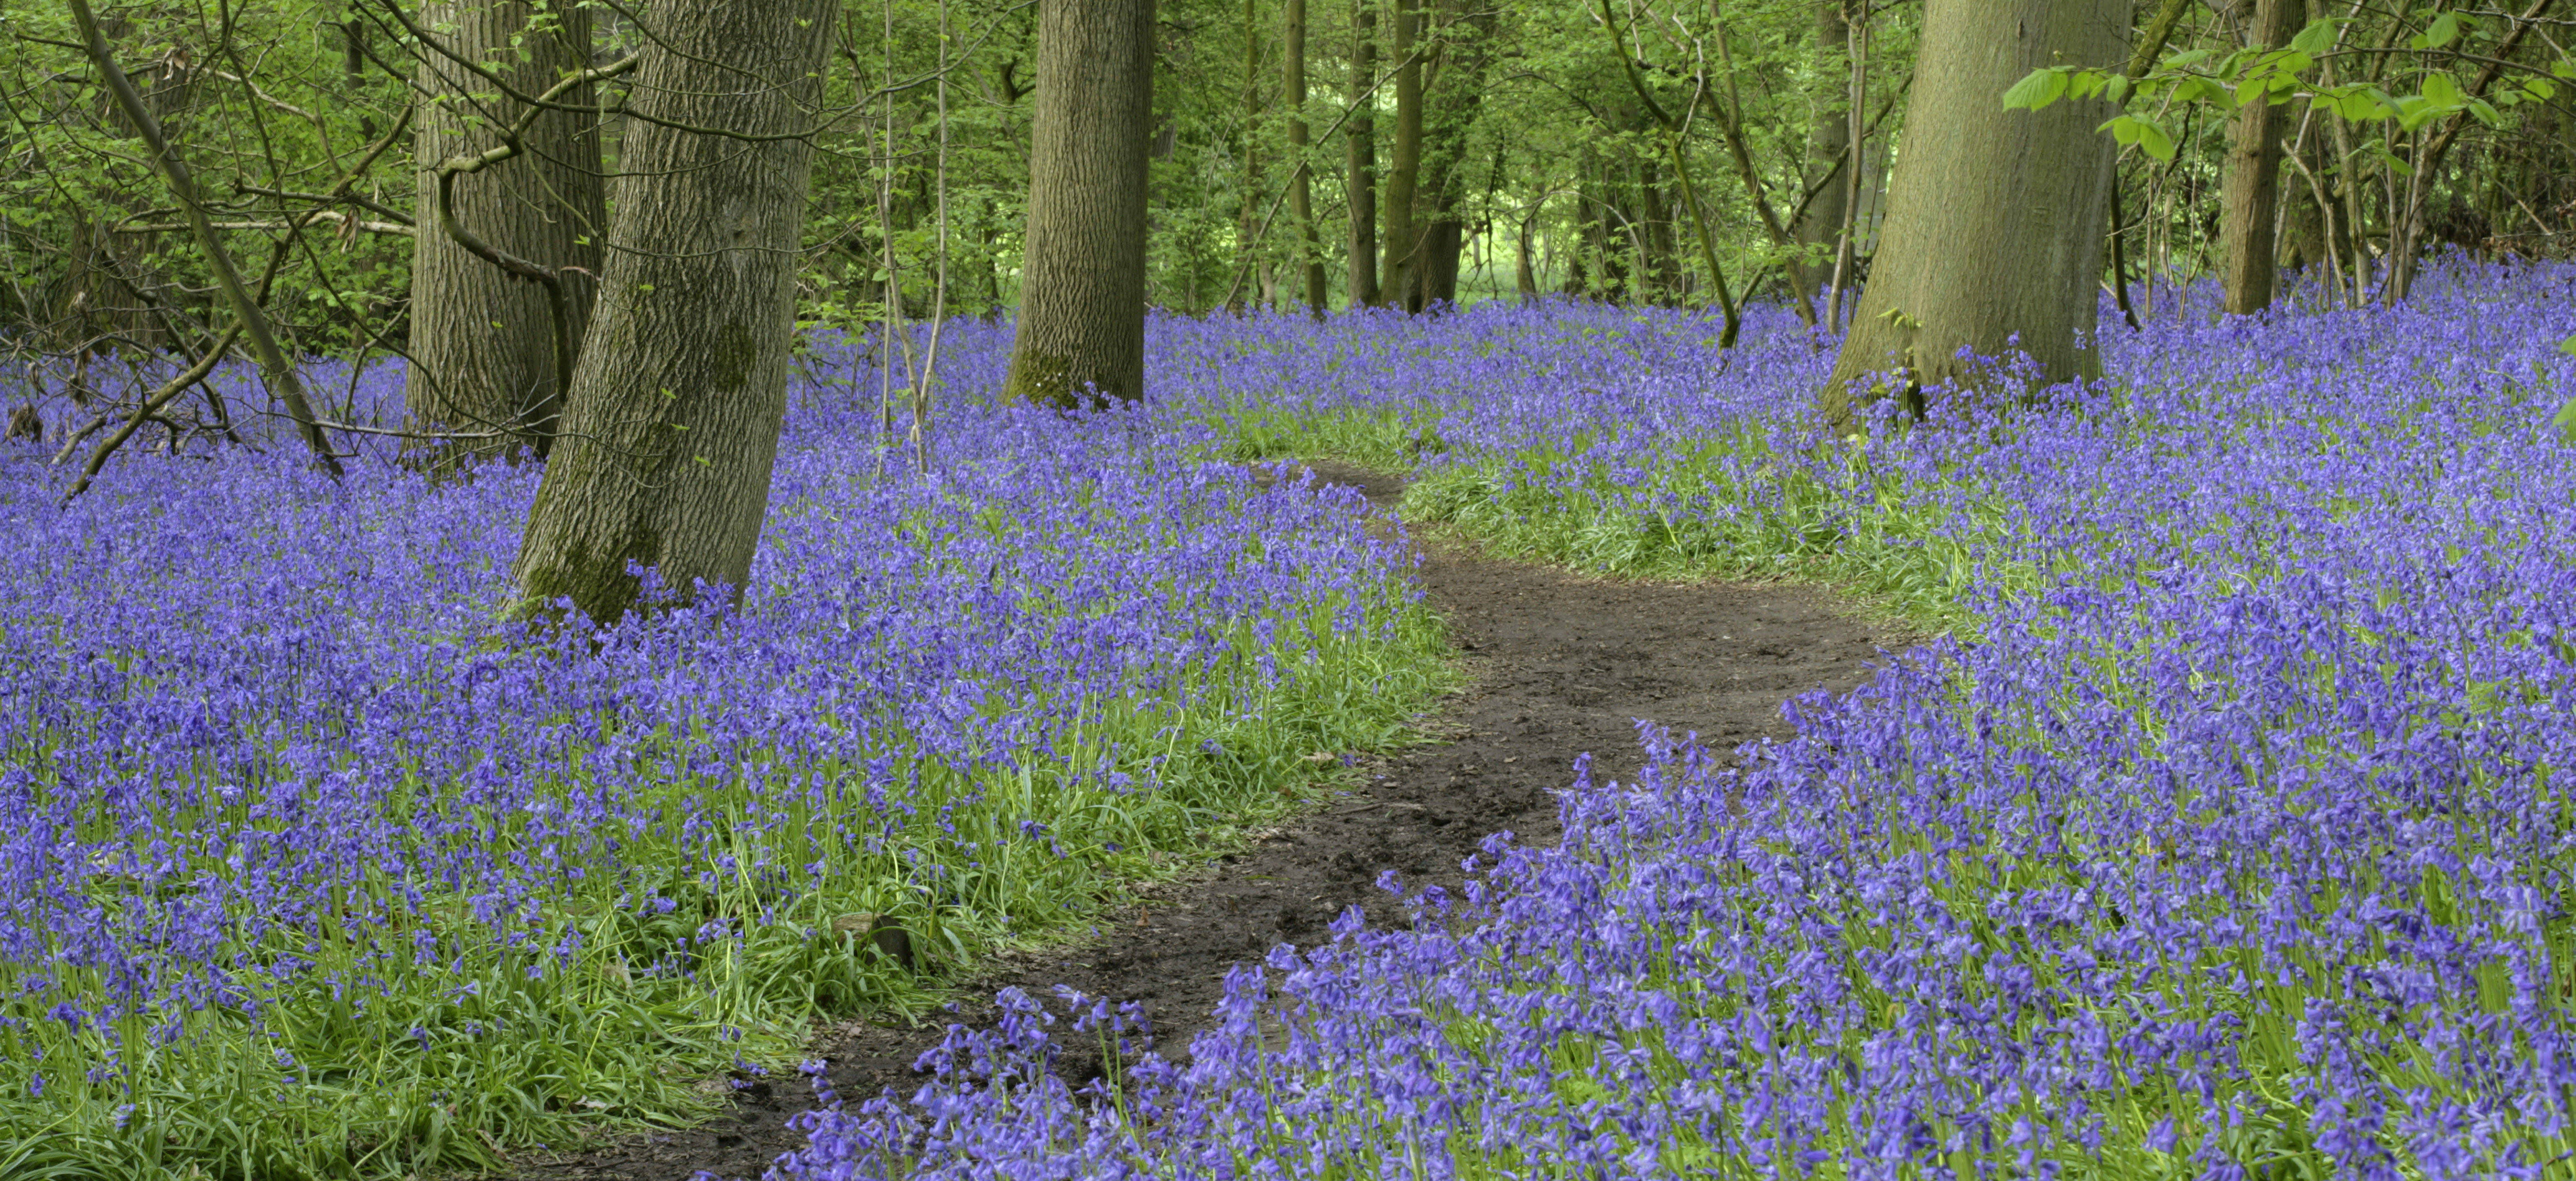 The Bluebell Woodland at Hatchlands Park - one of the largest country estates in the green belt surrounding Greater London